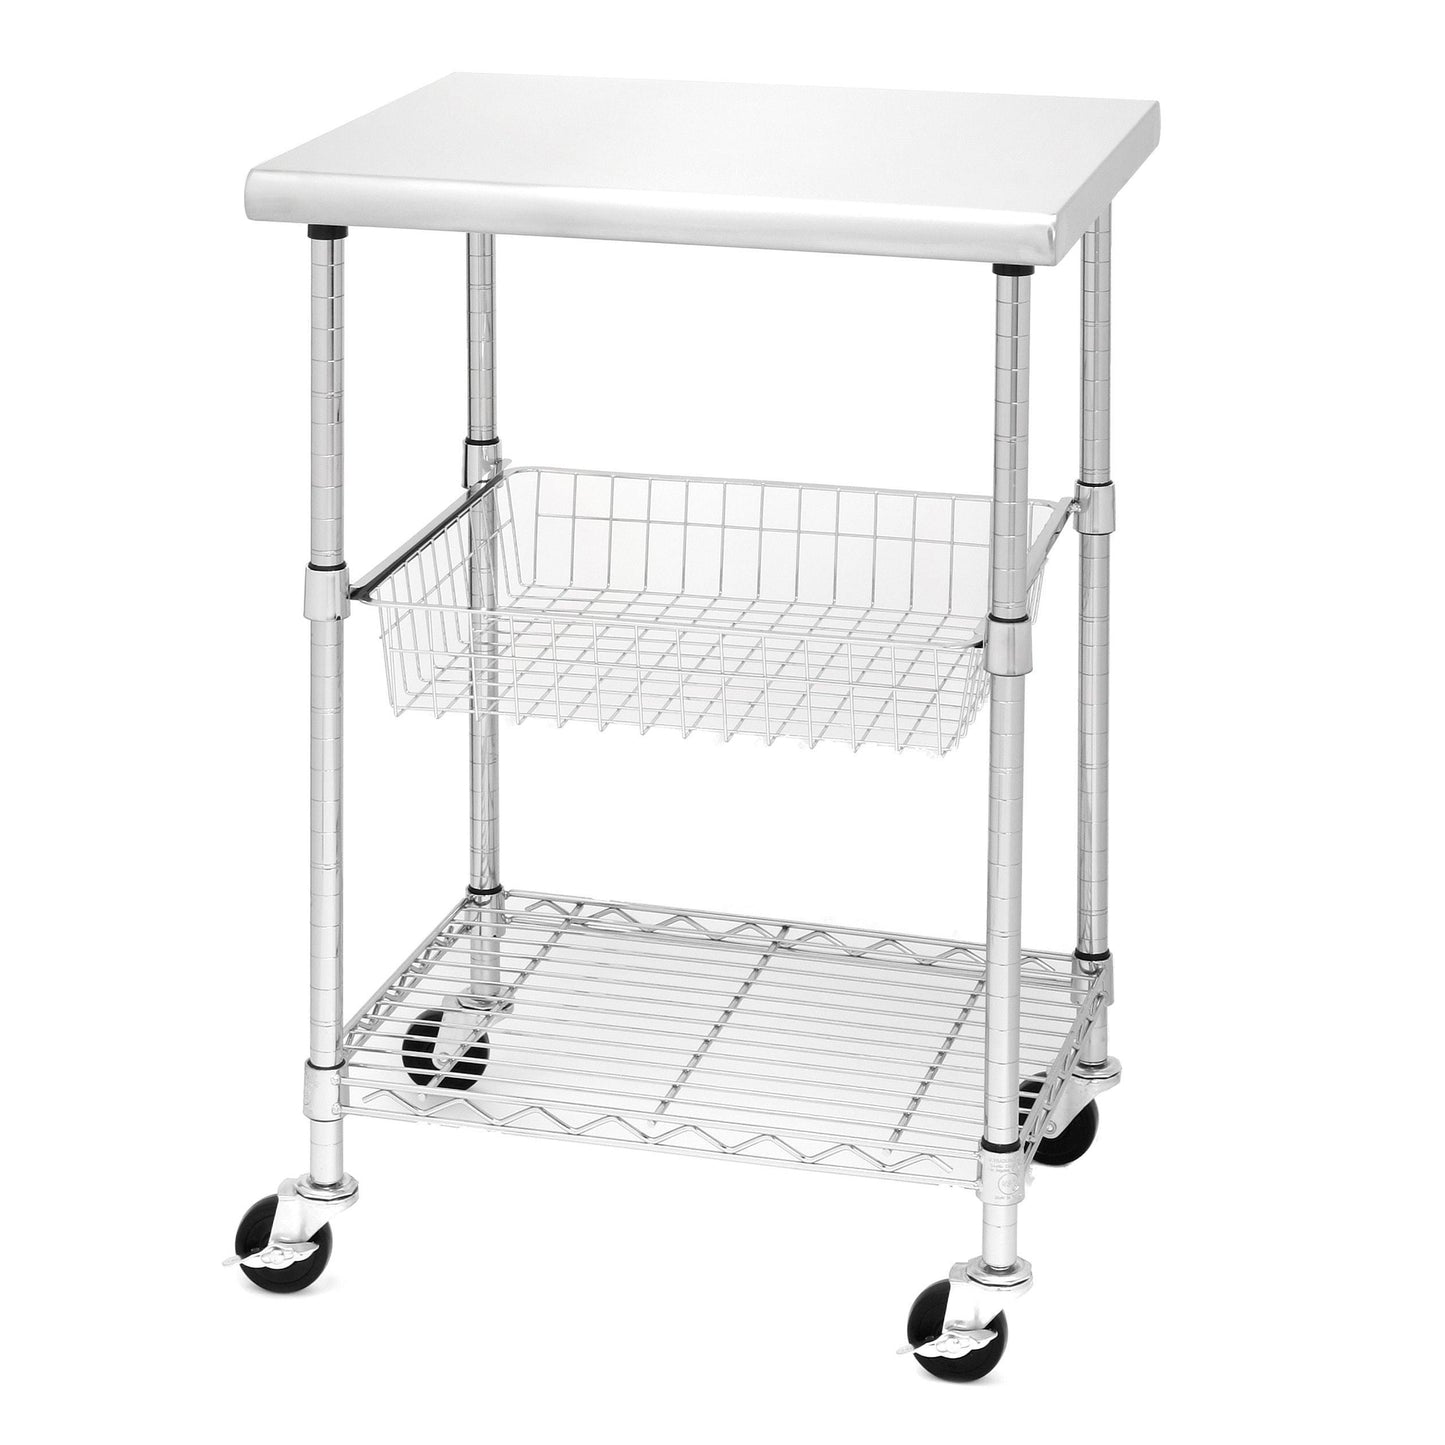 Home seville classics stainless steel nsf certified professional kitchen work table cart 24 w x 20 d x 36 h